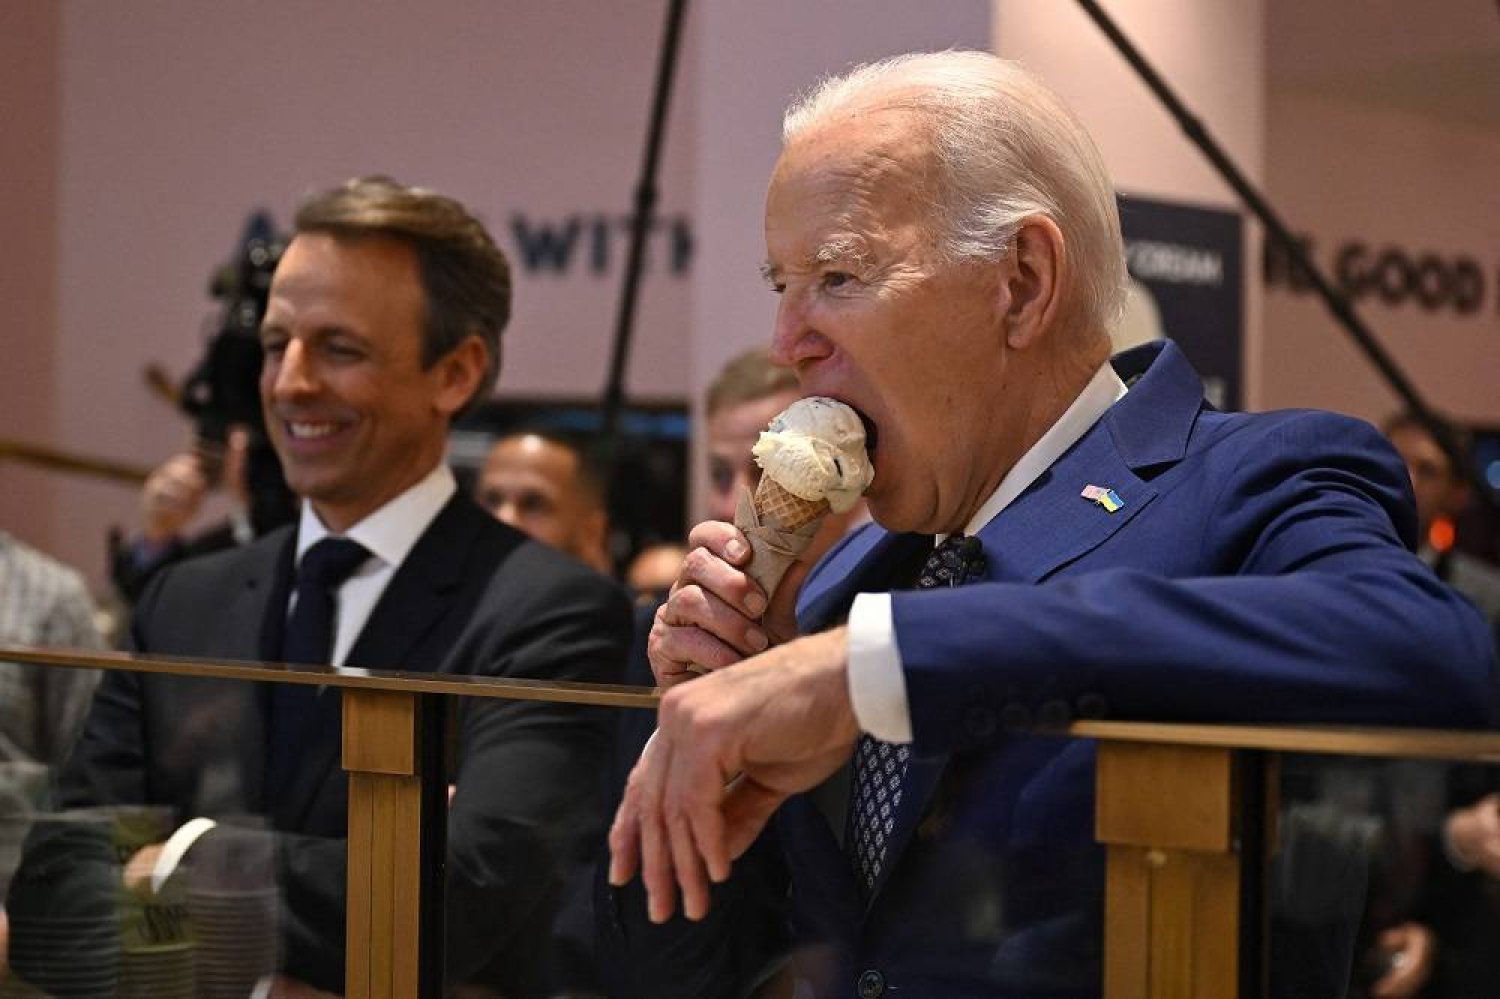 US President Joe Biden (R), flanked by host Seth Meyers (L), eats an ice cream cone at Van Leeuwen Ice Cream after taping an episode of "Late Night with Seth Meyers" in New York City on February 26, 2024. (AFP)